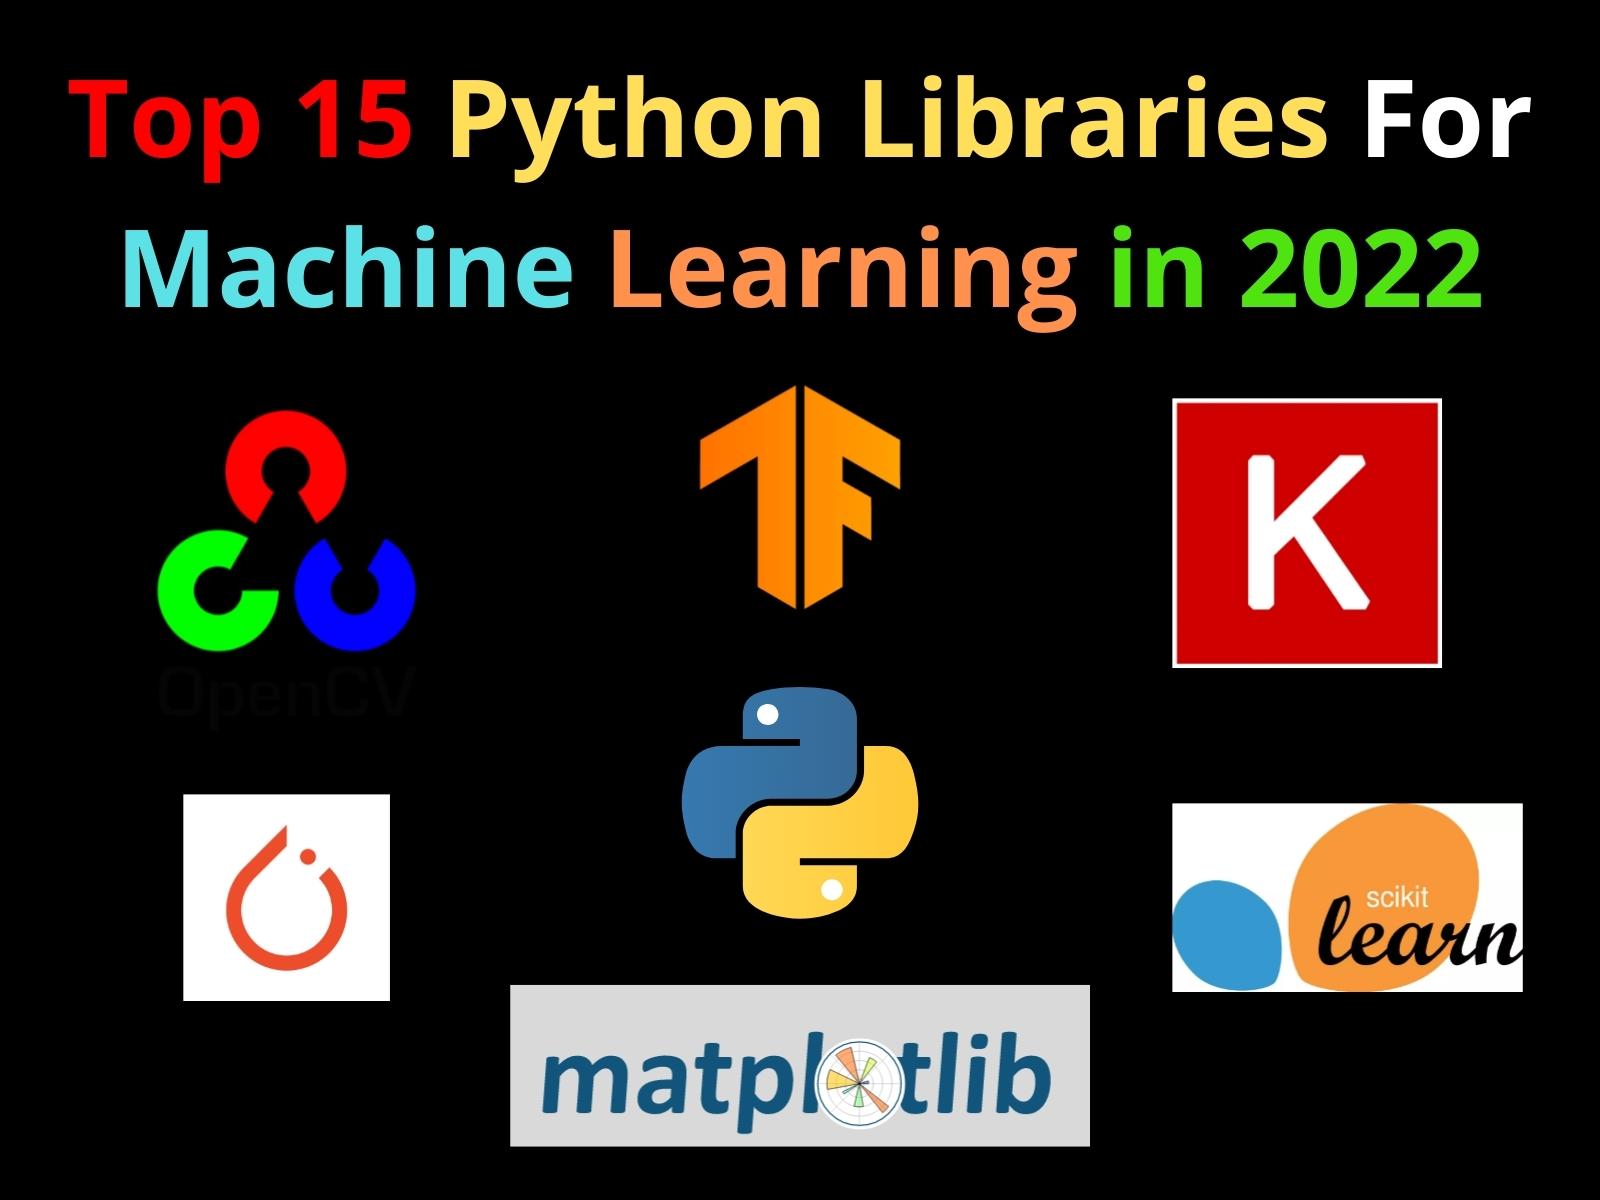 Top 15 Python Libraries For Machine Learning in 2022